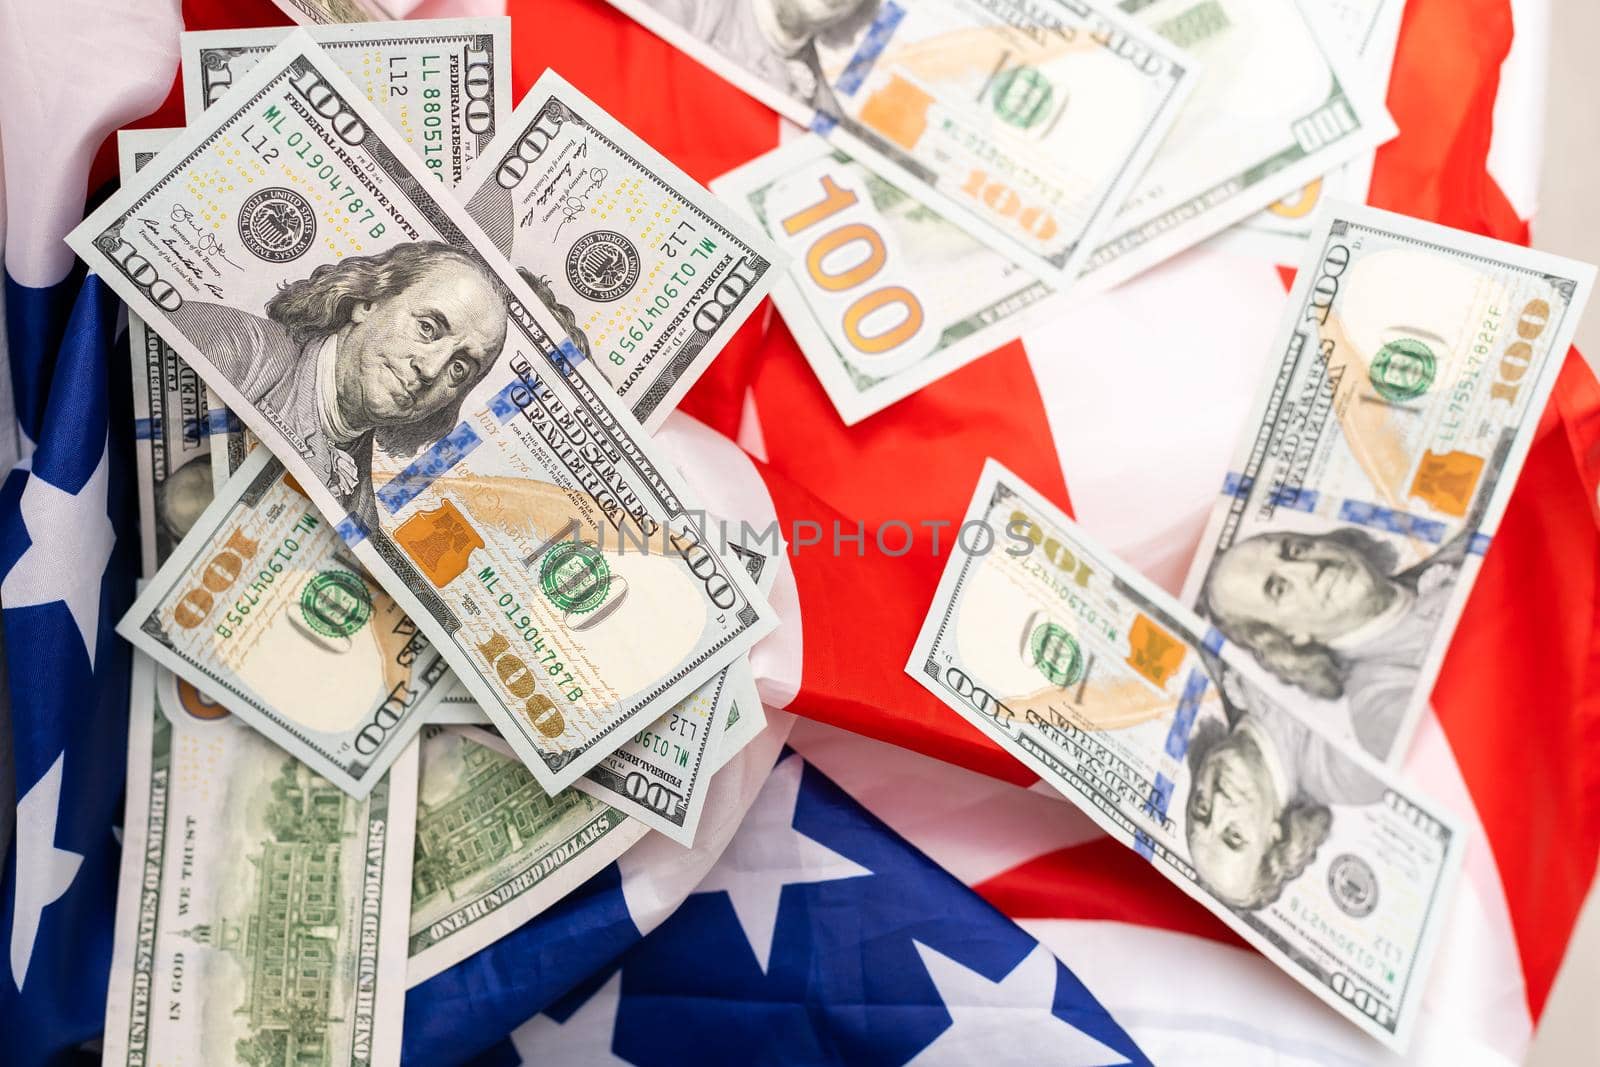 American dollars and flag. Stock images. Top image.